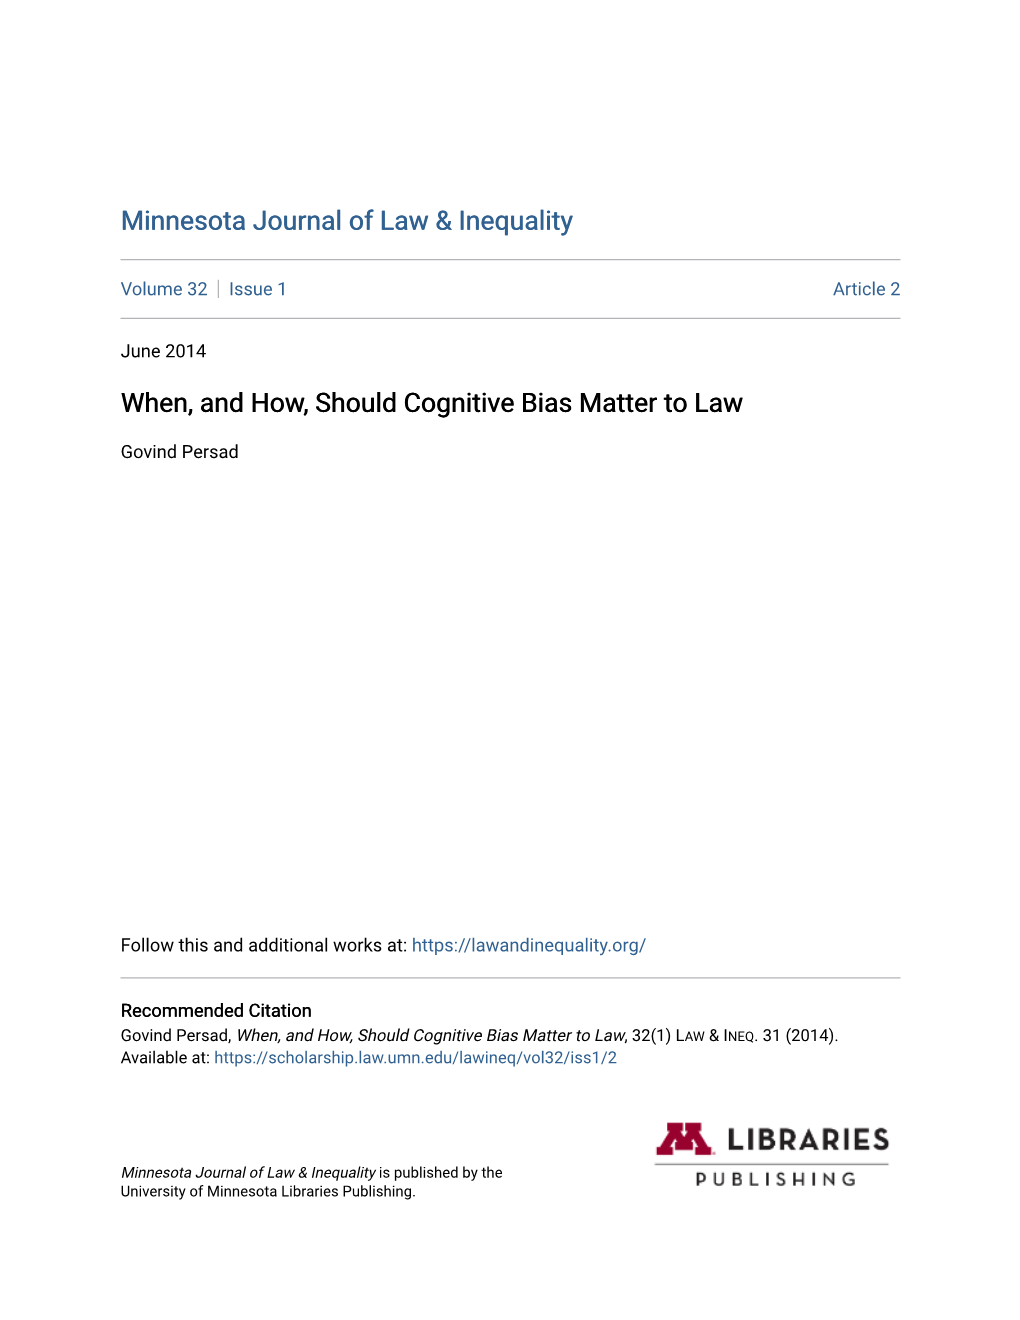 When, and How, Should Cognitive Bias Matter to Law